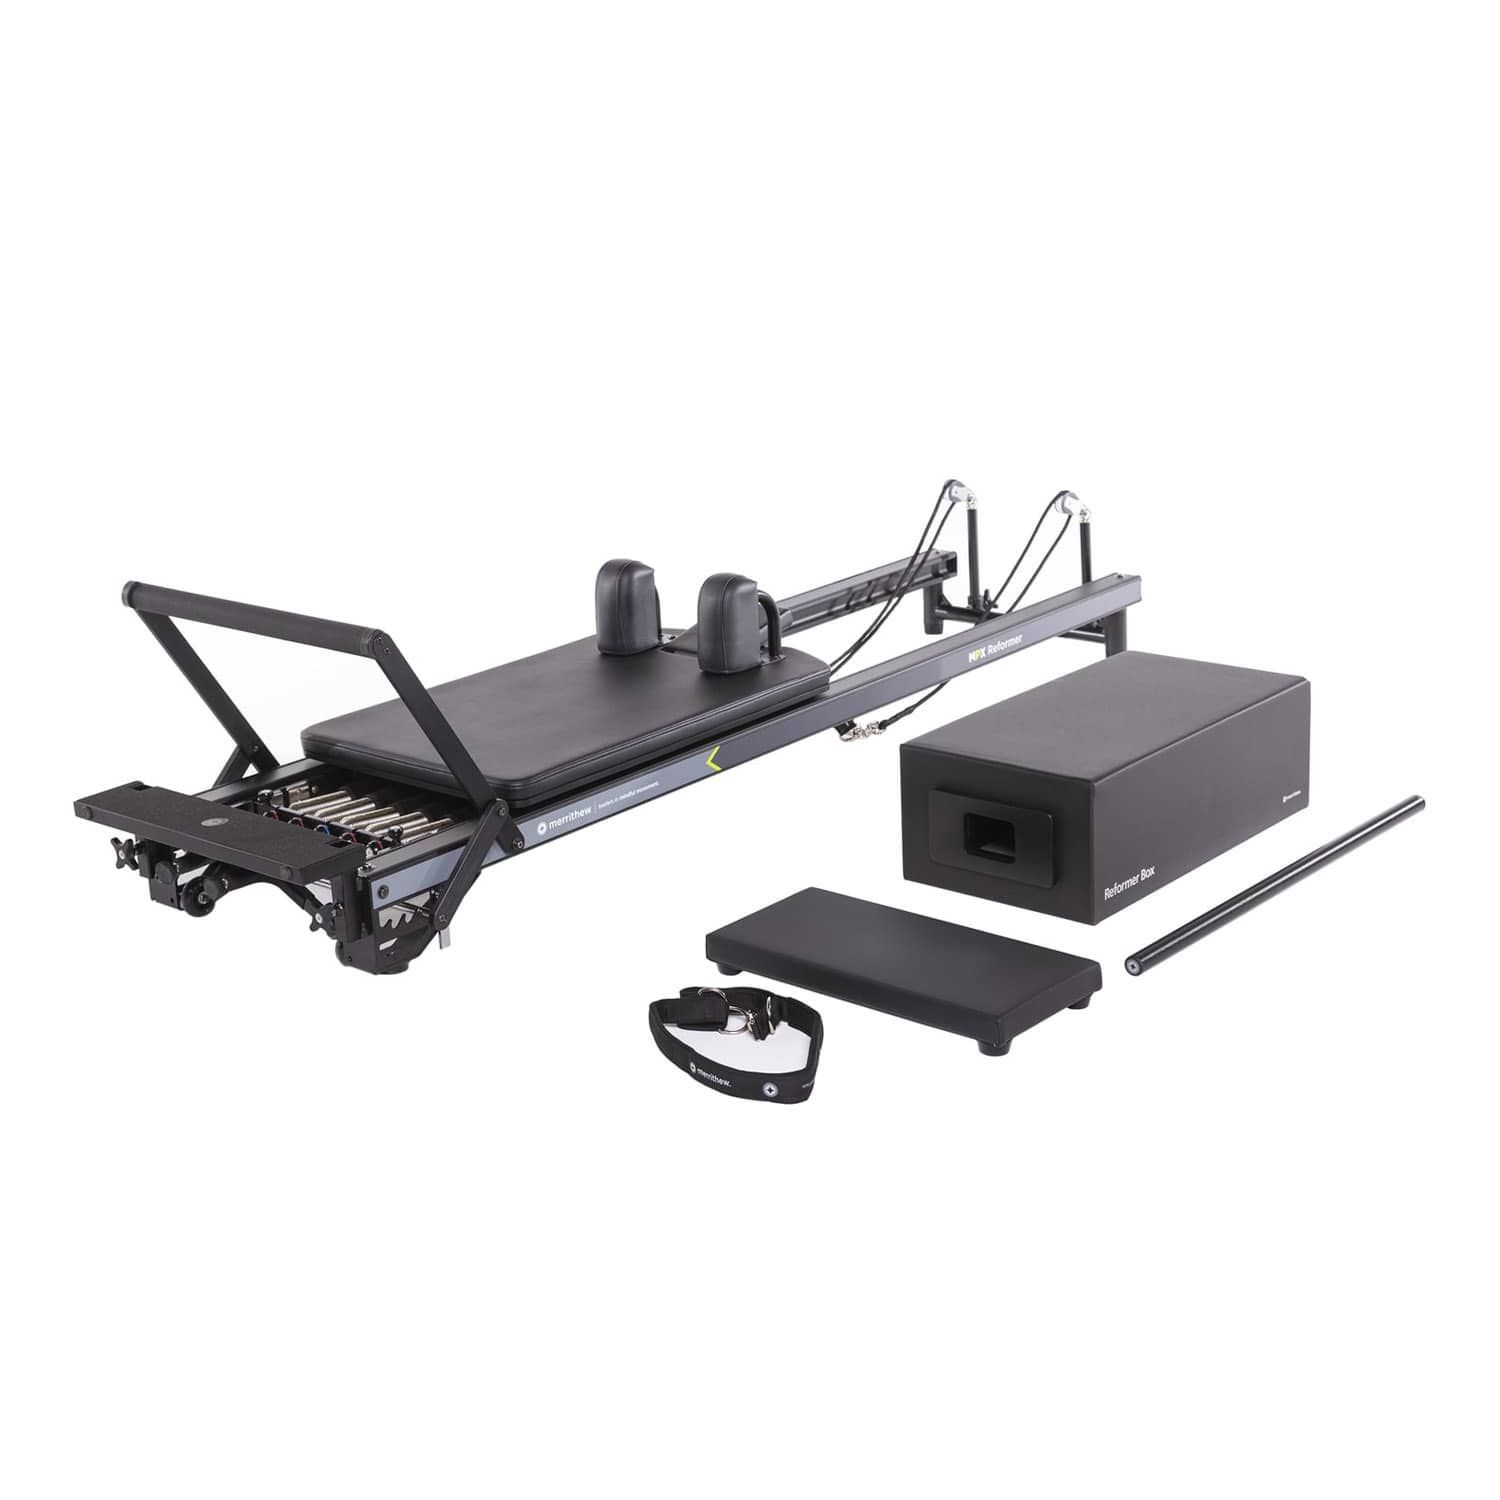 SPX® Max Reformer Bundle with Tall Box